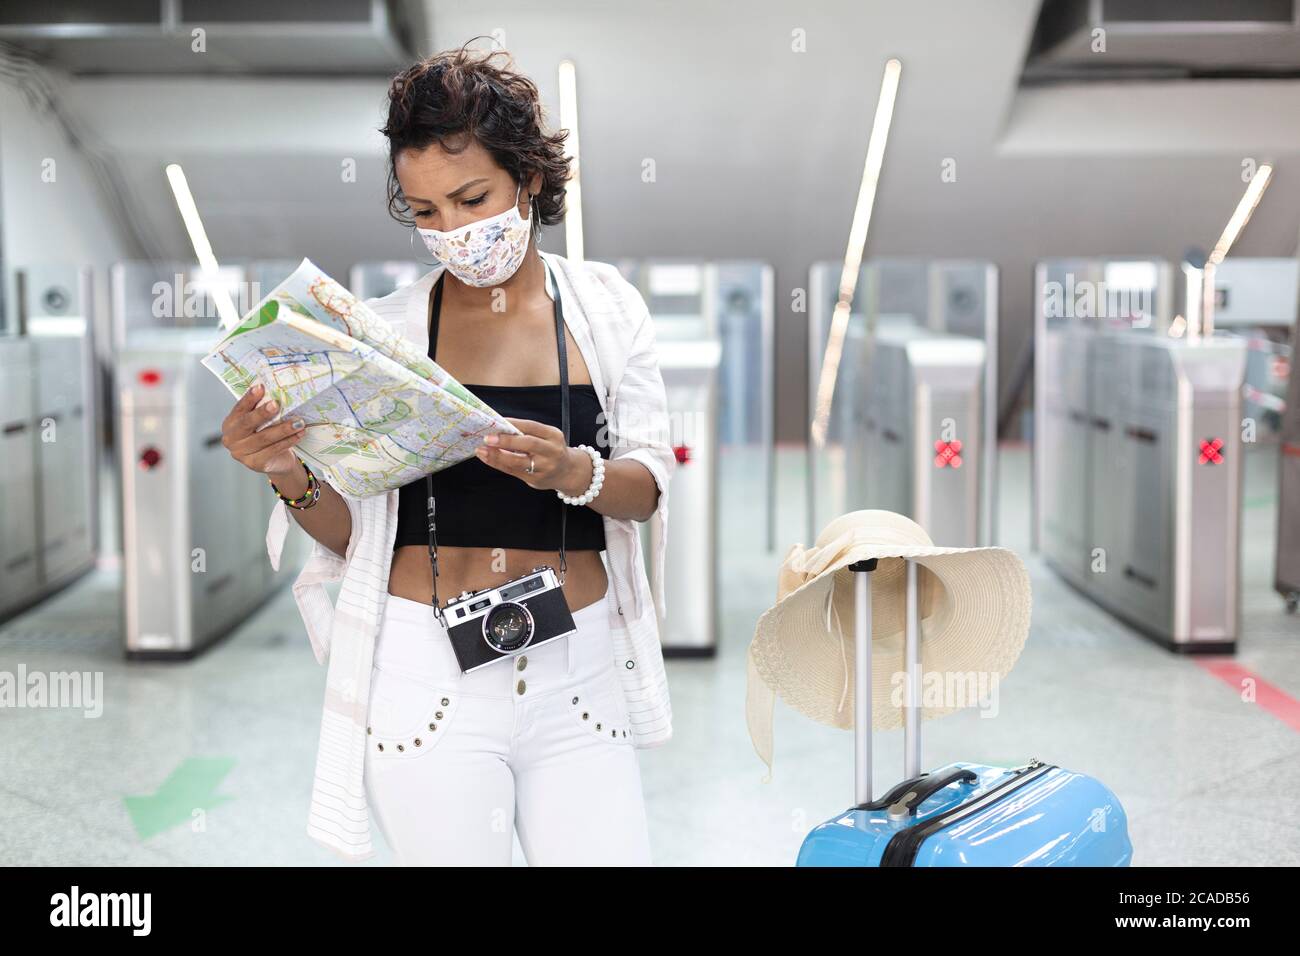 Traveling woman with a face mask looking at a tourist map. She's standing next to a travel bag. New normal travel after covid-19 pandemic concept. Stock Photo